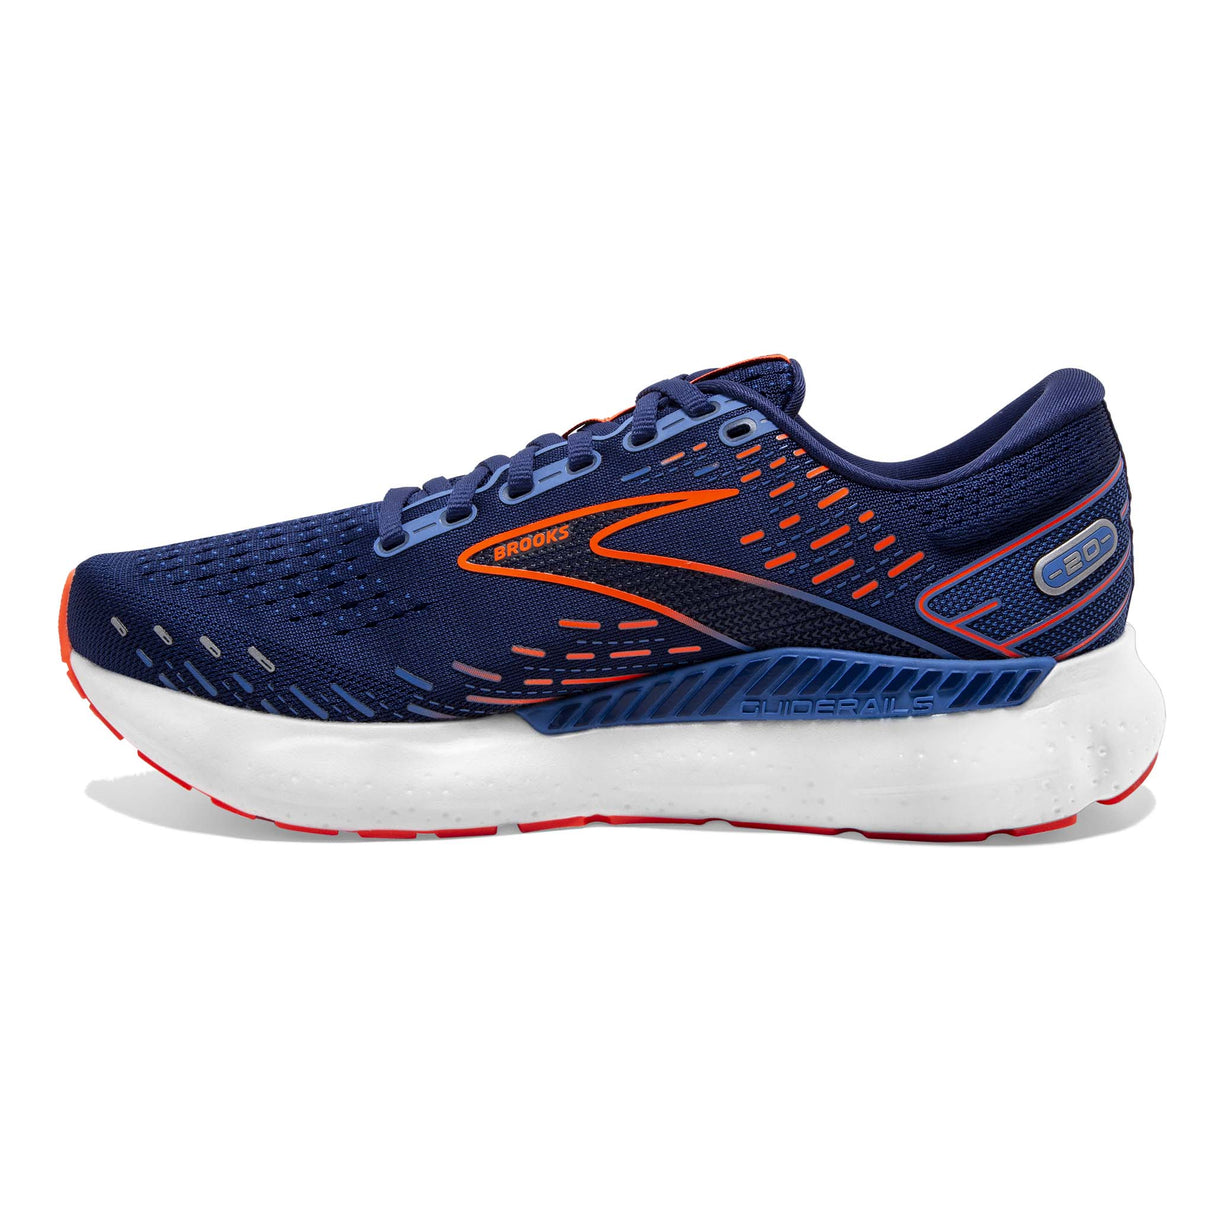 Brooks Glycerin GTS 20 running homme blue depths palace blue orange lateral